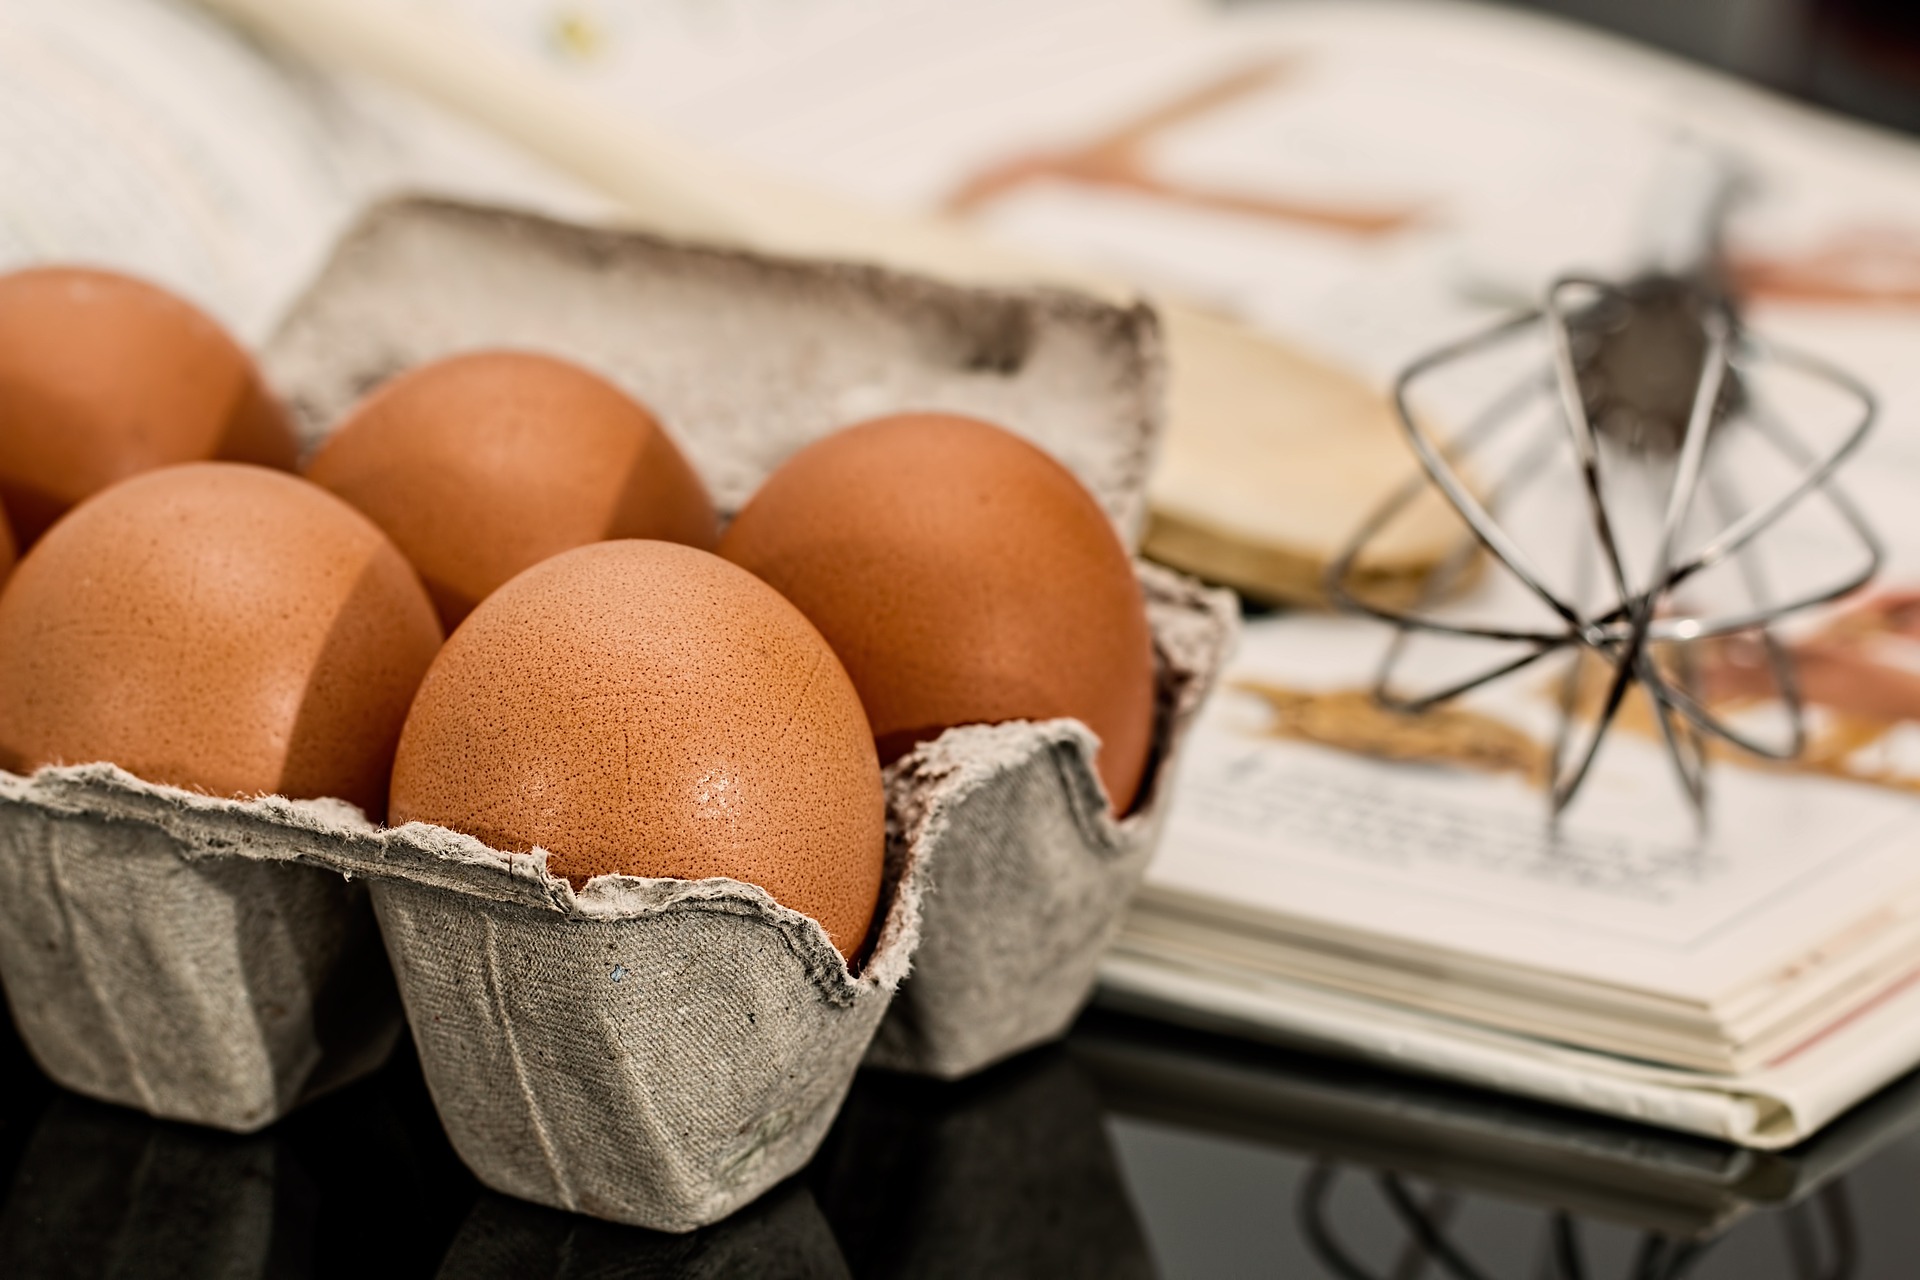 A cookbook, carton of eggs and a whisk